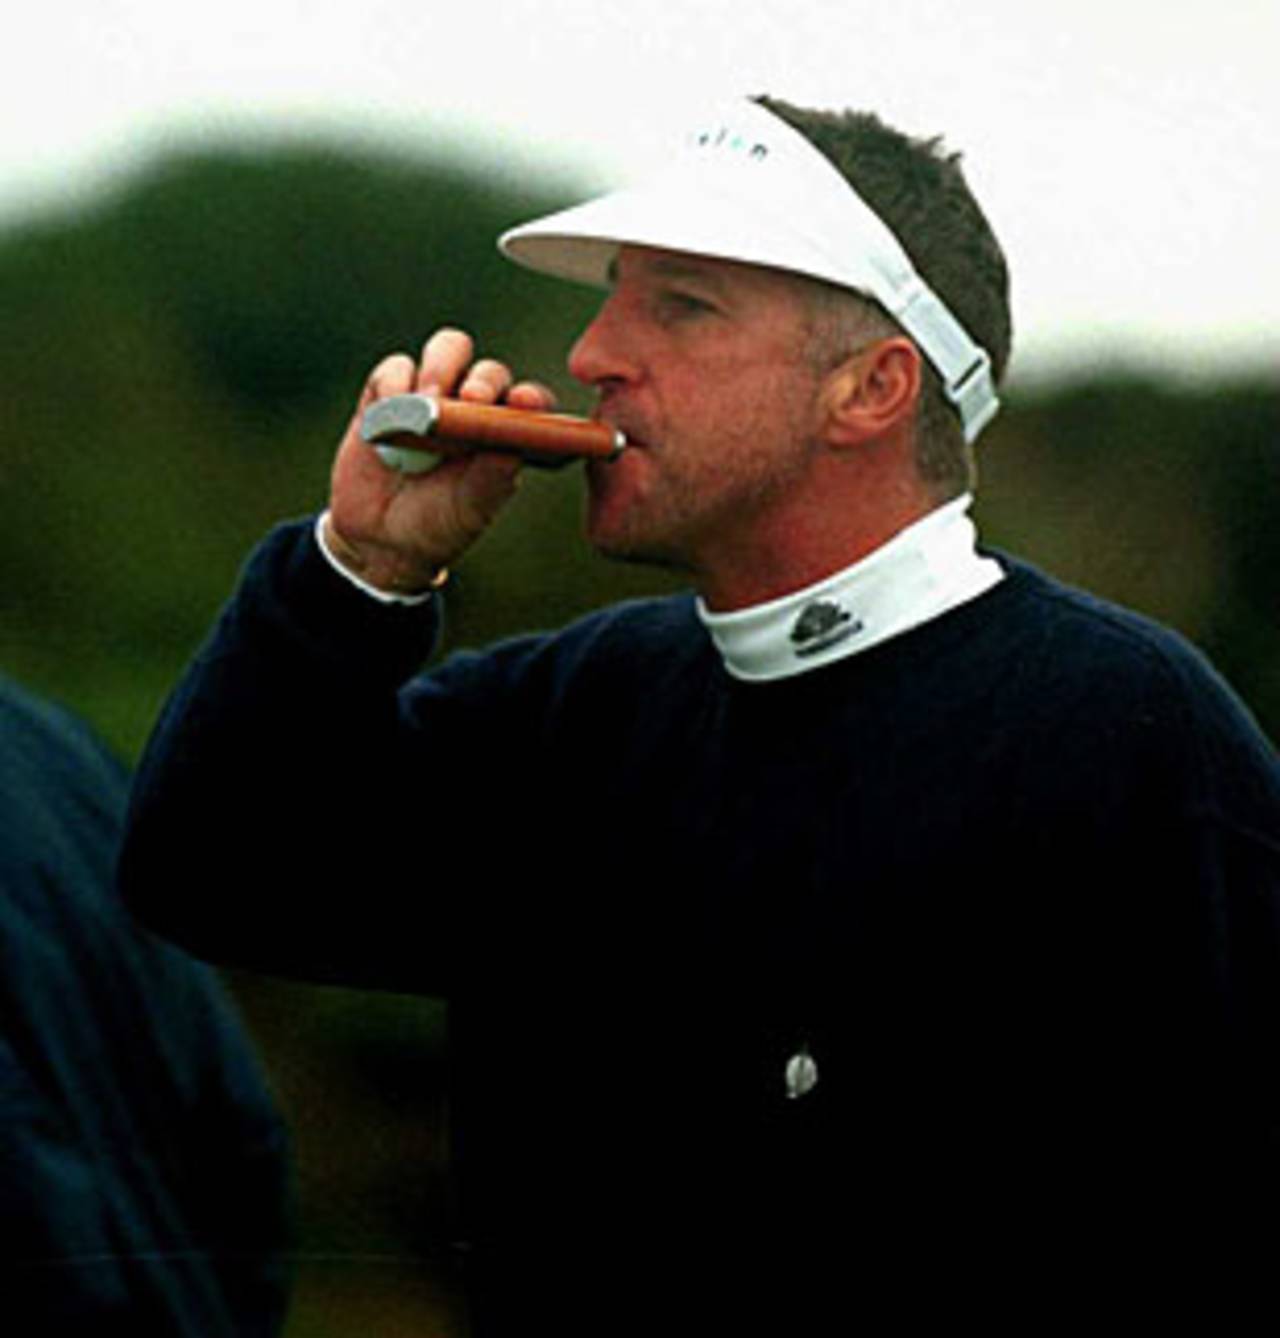 Ian Botham takes a sip from his hip flask as tennis player Ivan Lendl looks on ahead of the Alfred Dunhill Cup, Scotland, October 10, 2000